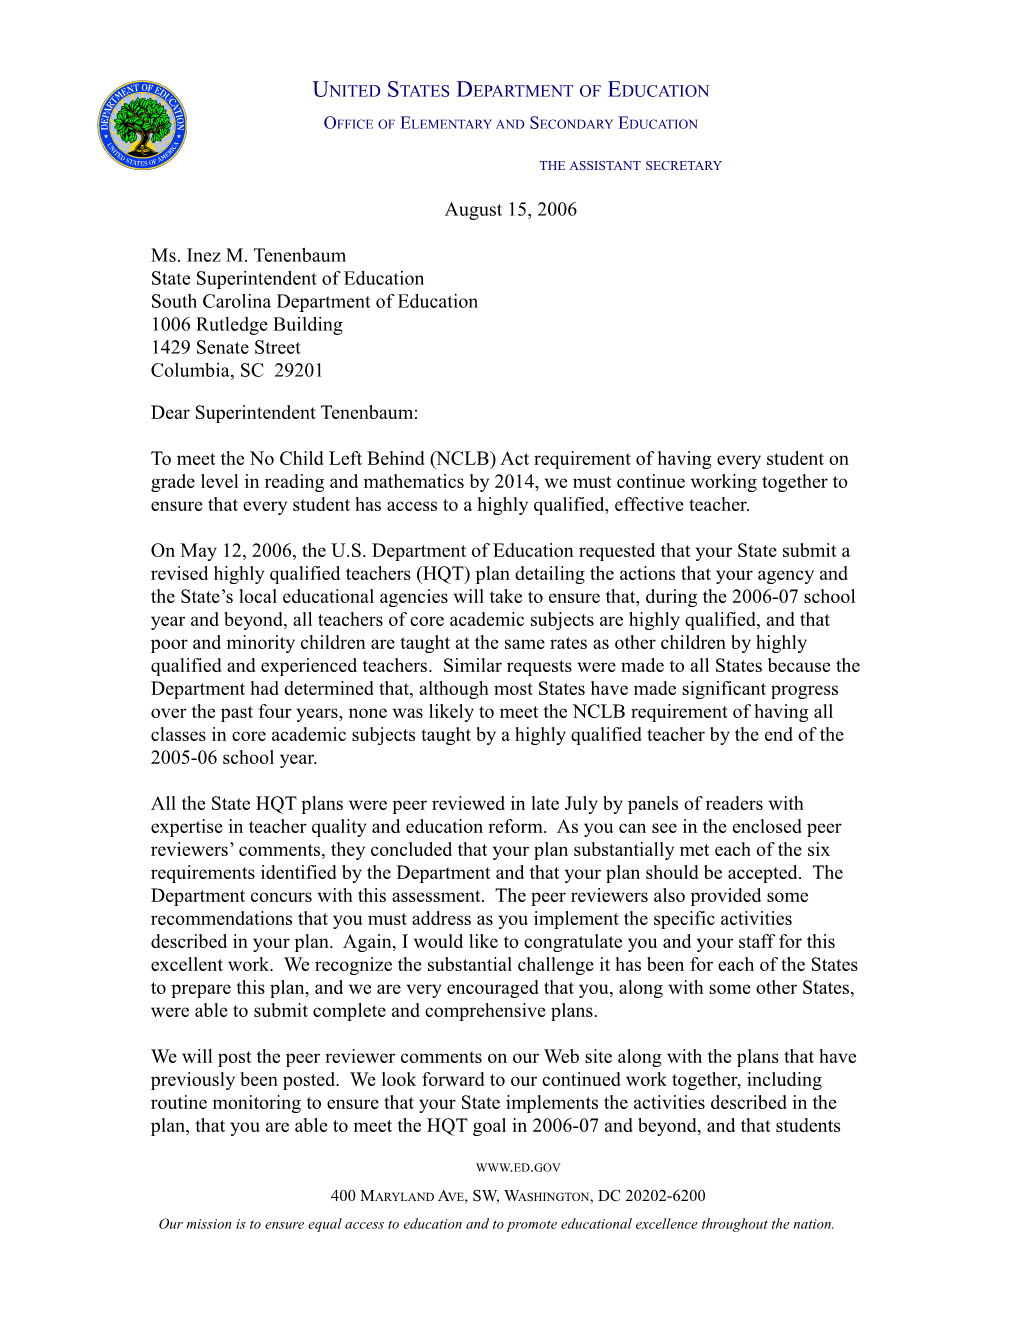 South Carolina Letter to Chief State School Officer Regarding the Peer Review Comments